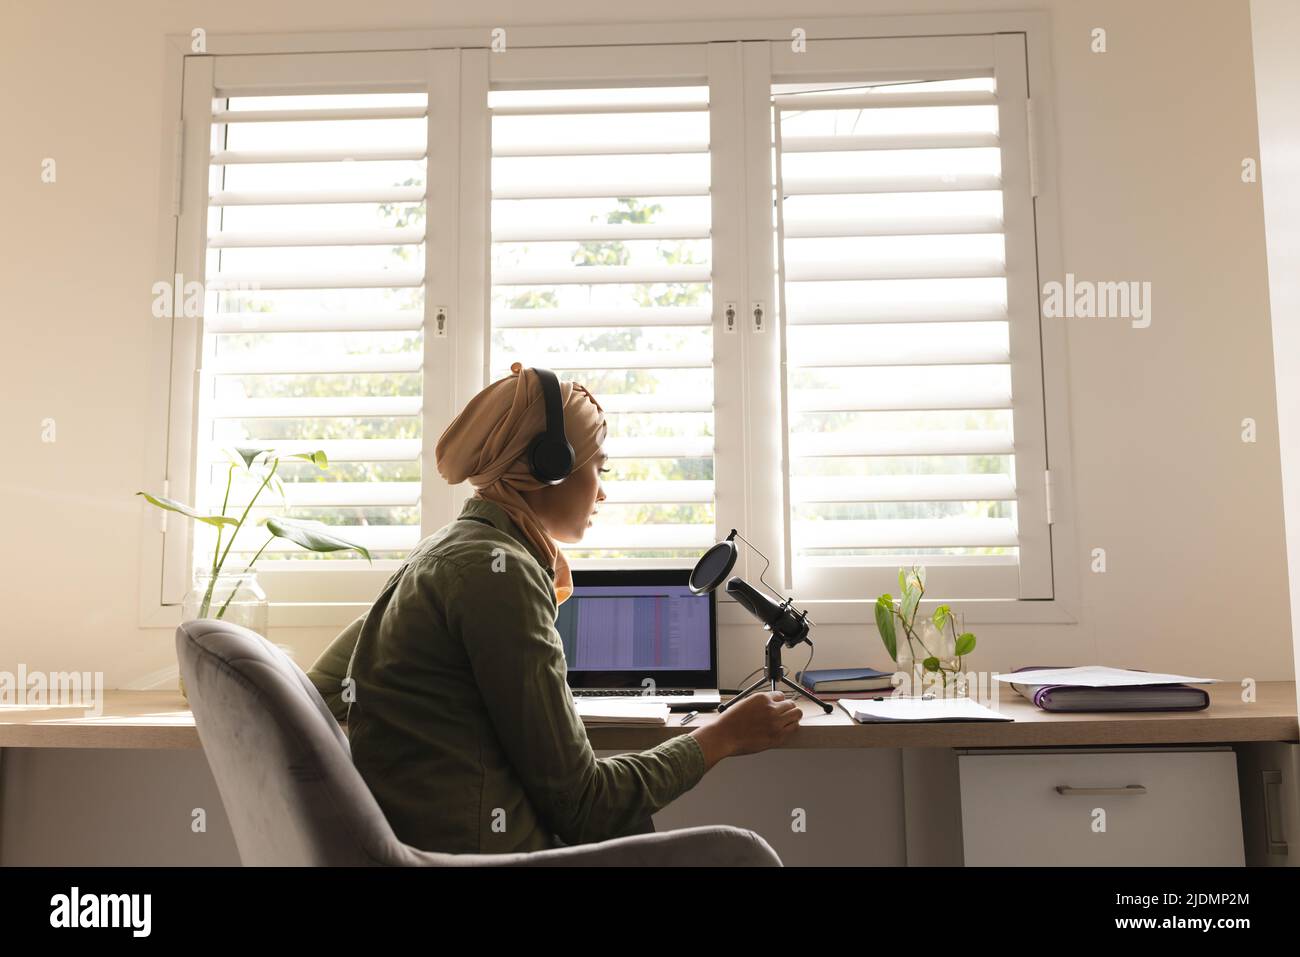 Home Studio Podcast Interior With Professional Microphone Computer Pc And  Headphone Technology And Audio Equipment Concept Stock Photo - Download  Image Now - iStock